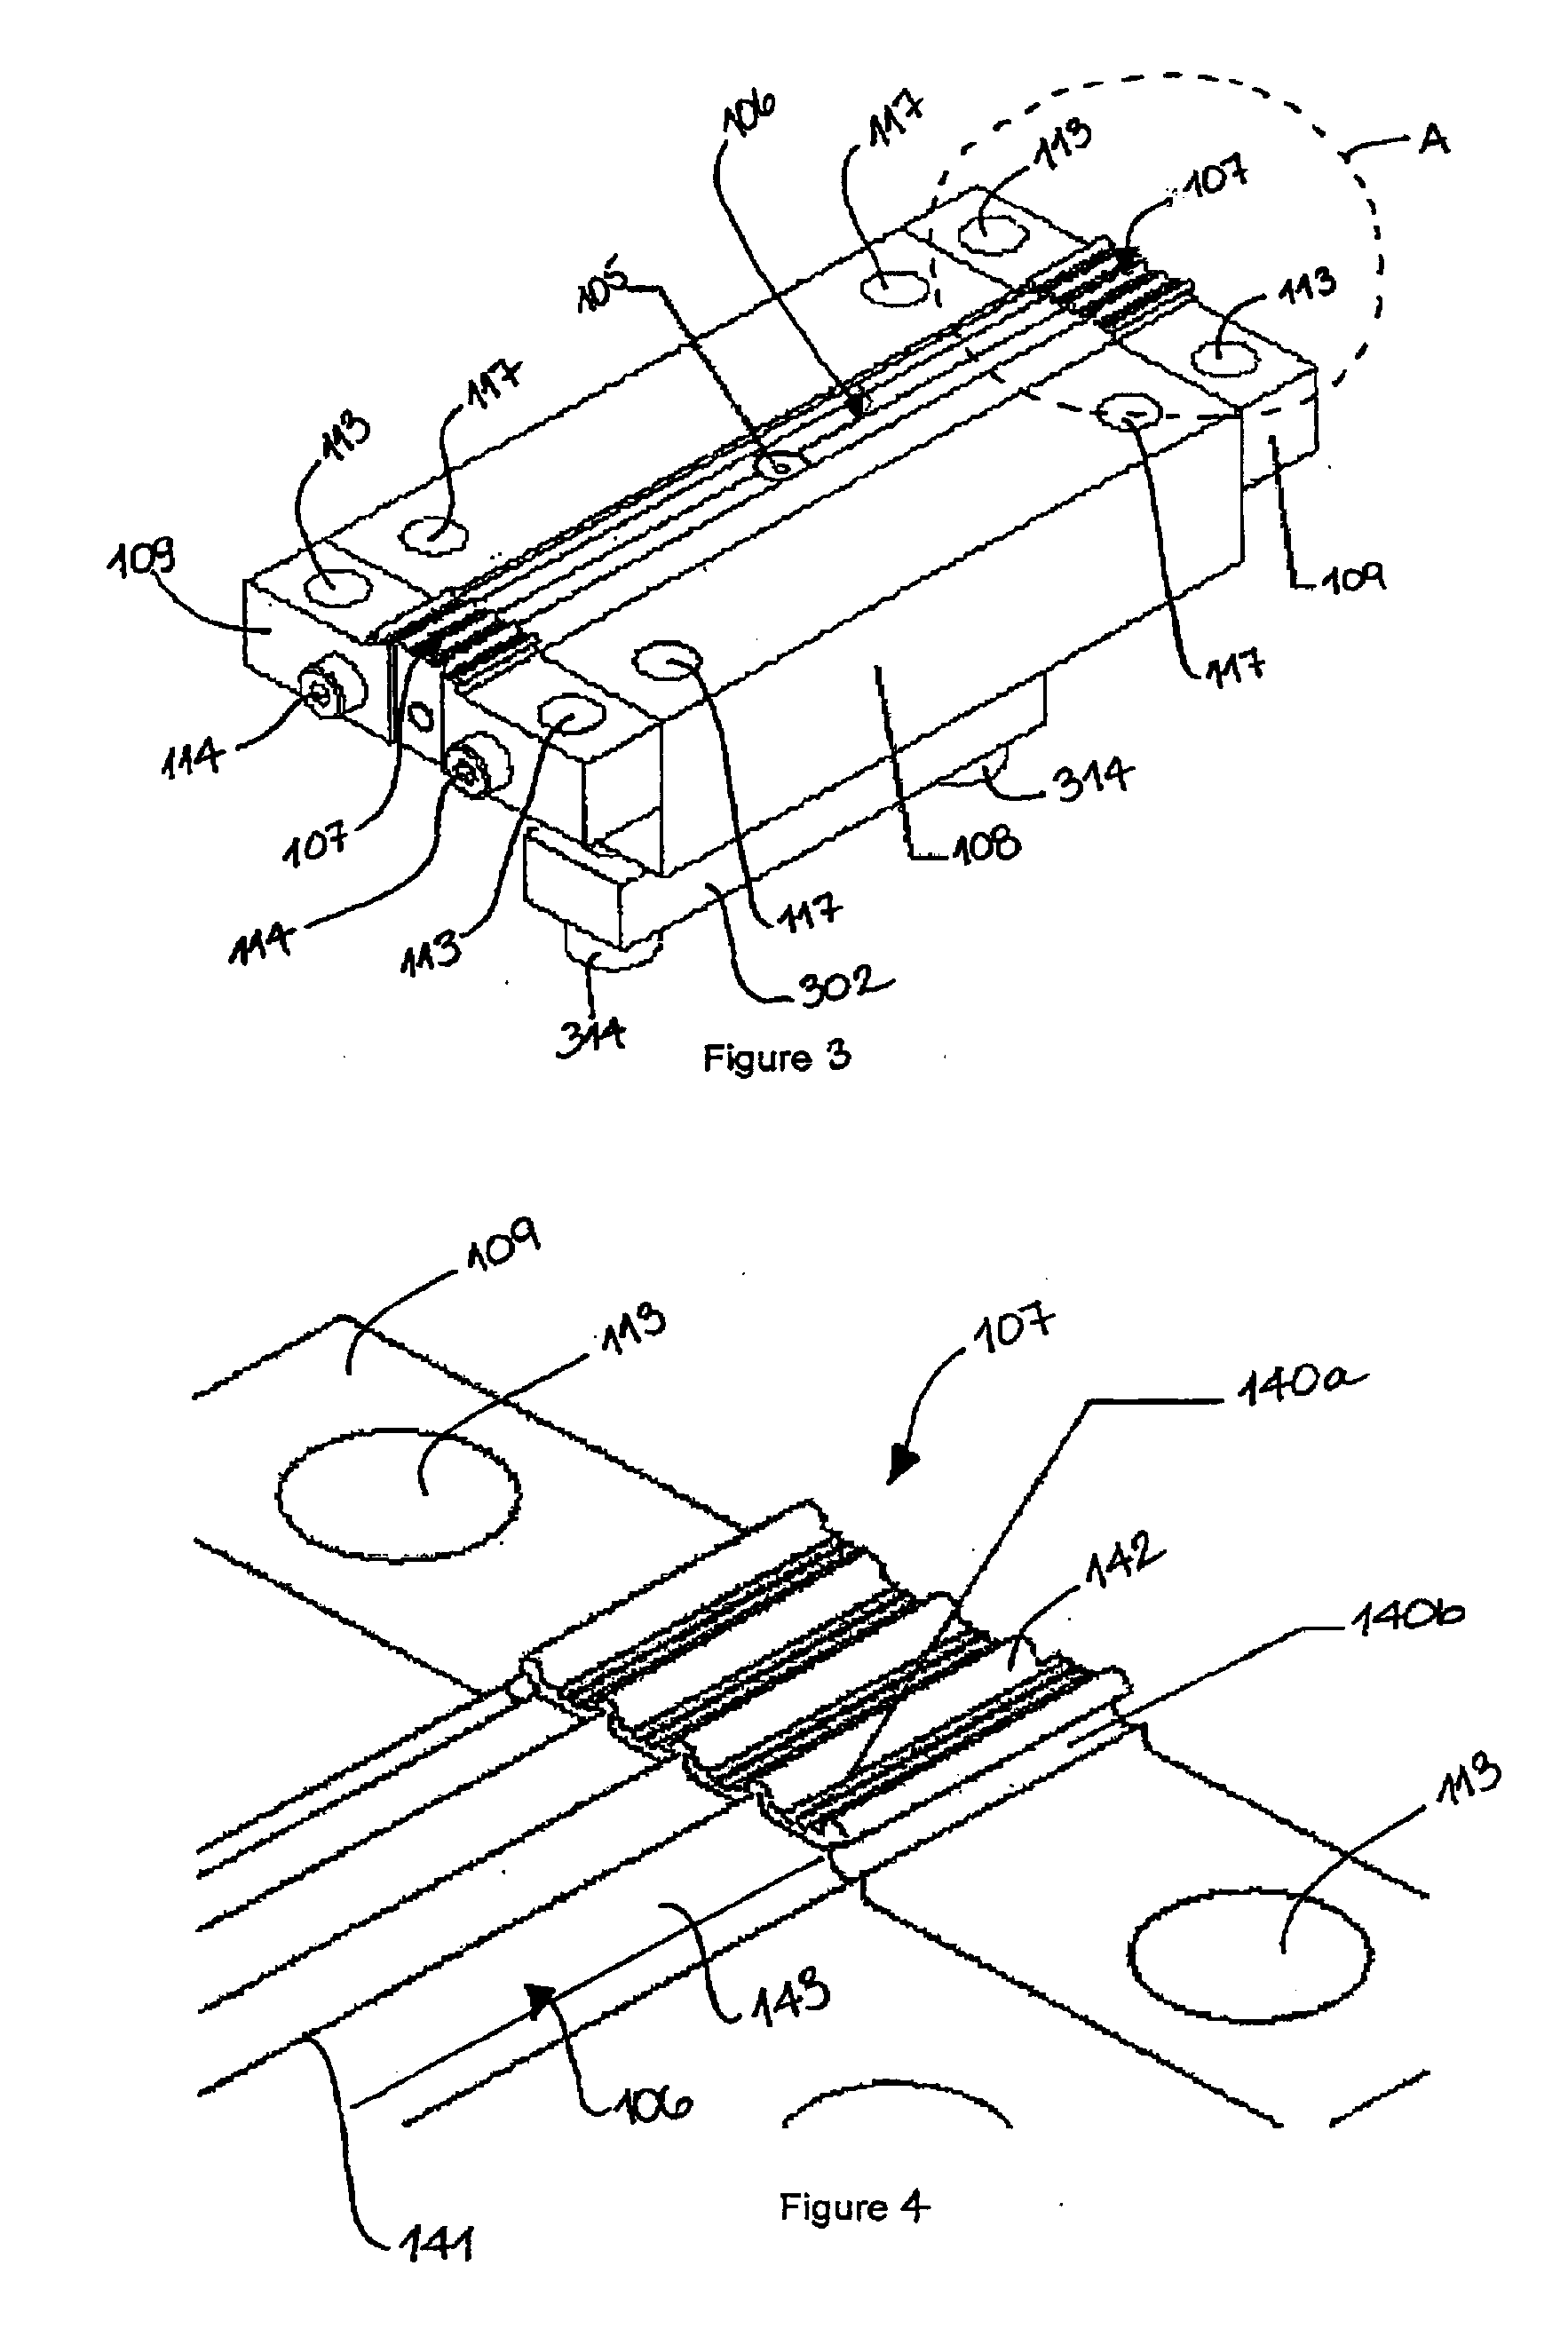 Nerve cuff injection mold and method of making a nerve cuff